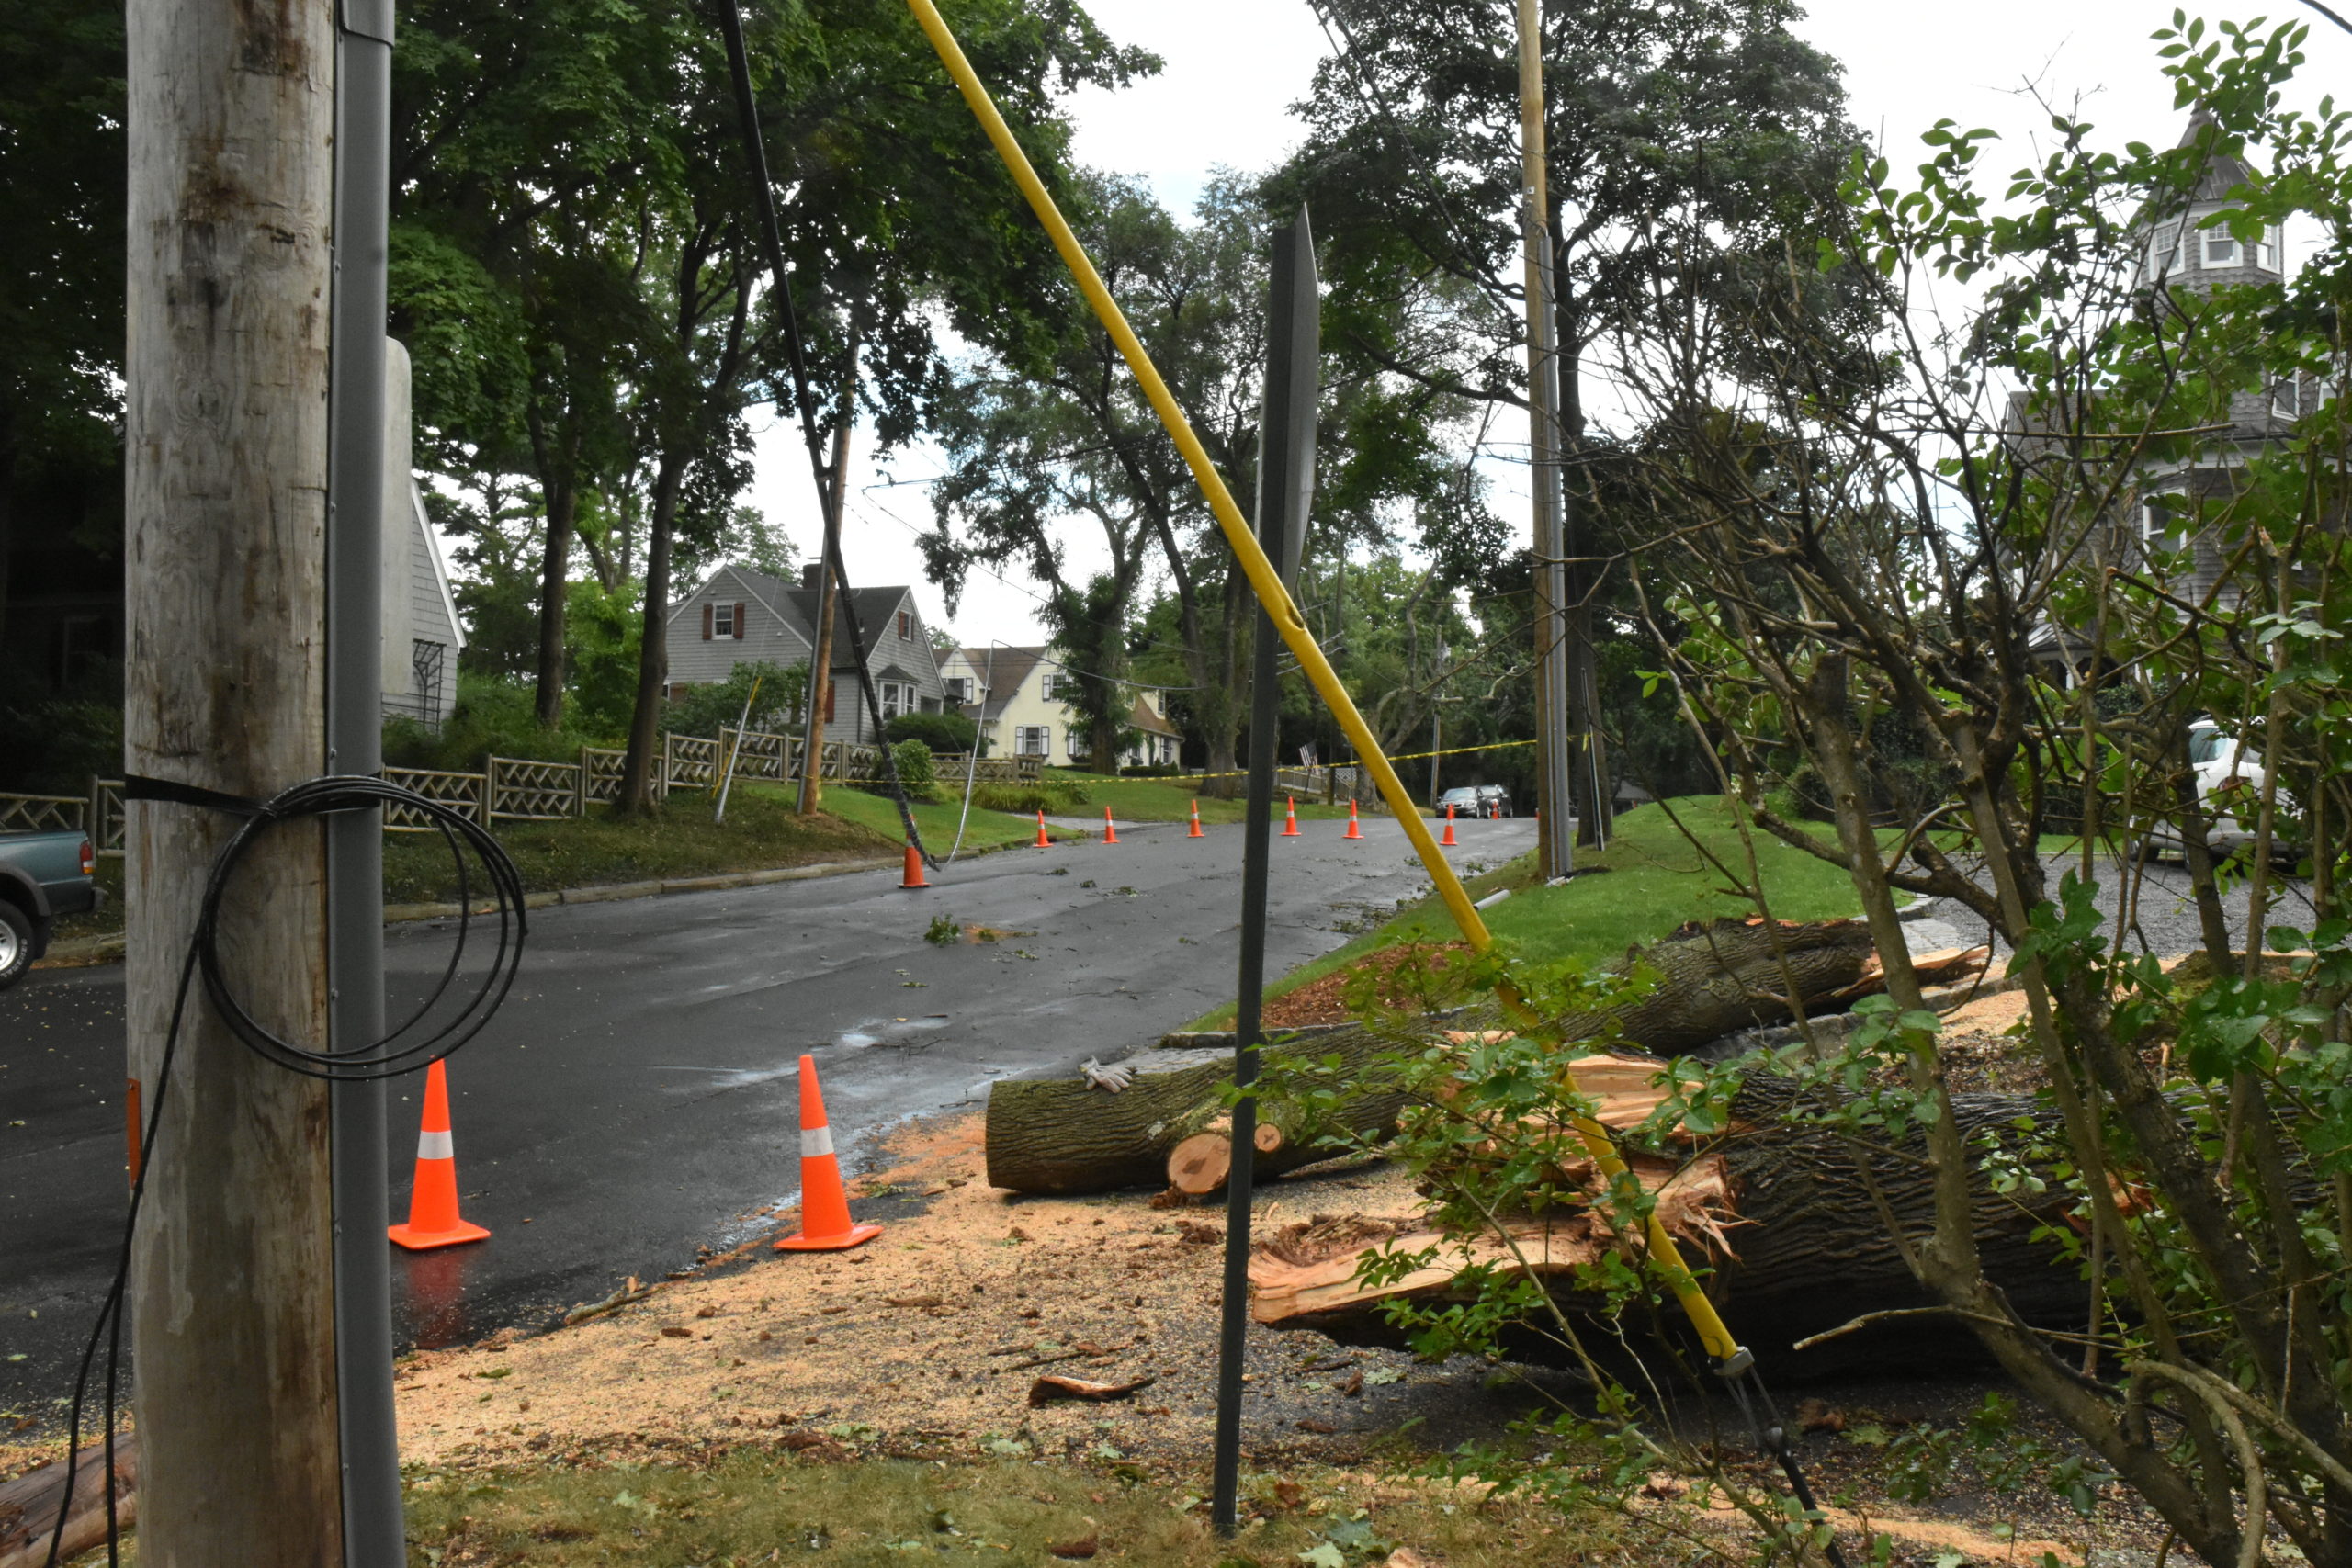 Rysam Street in Sag Harbor remained closed to traffic on Friday, August 7, three days after Tropical Storm Isaias blew down limbs that brought down power lines. PSEG - Long Island has come under criticism from elected offiicals over its response to the storm. STEPHEN J. KOTZ